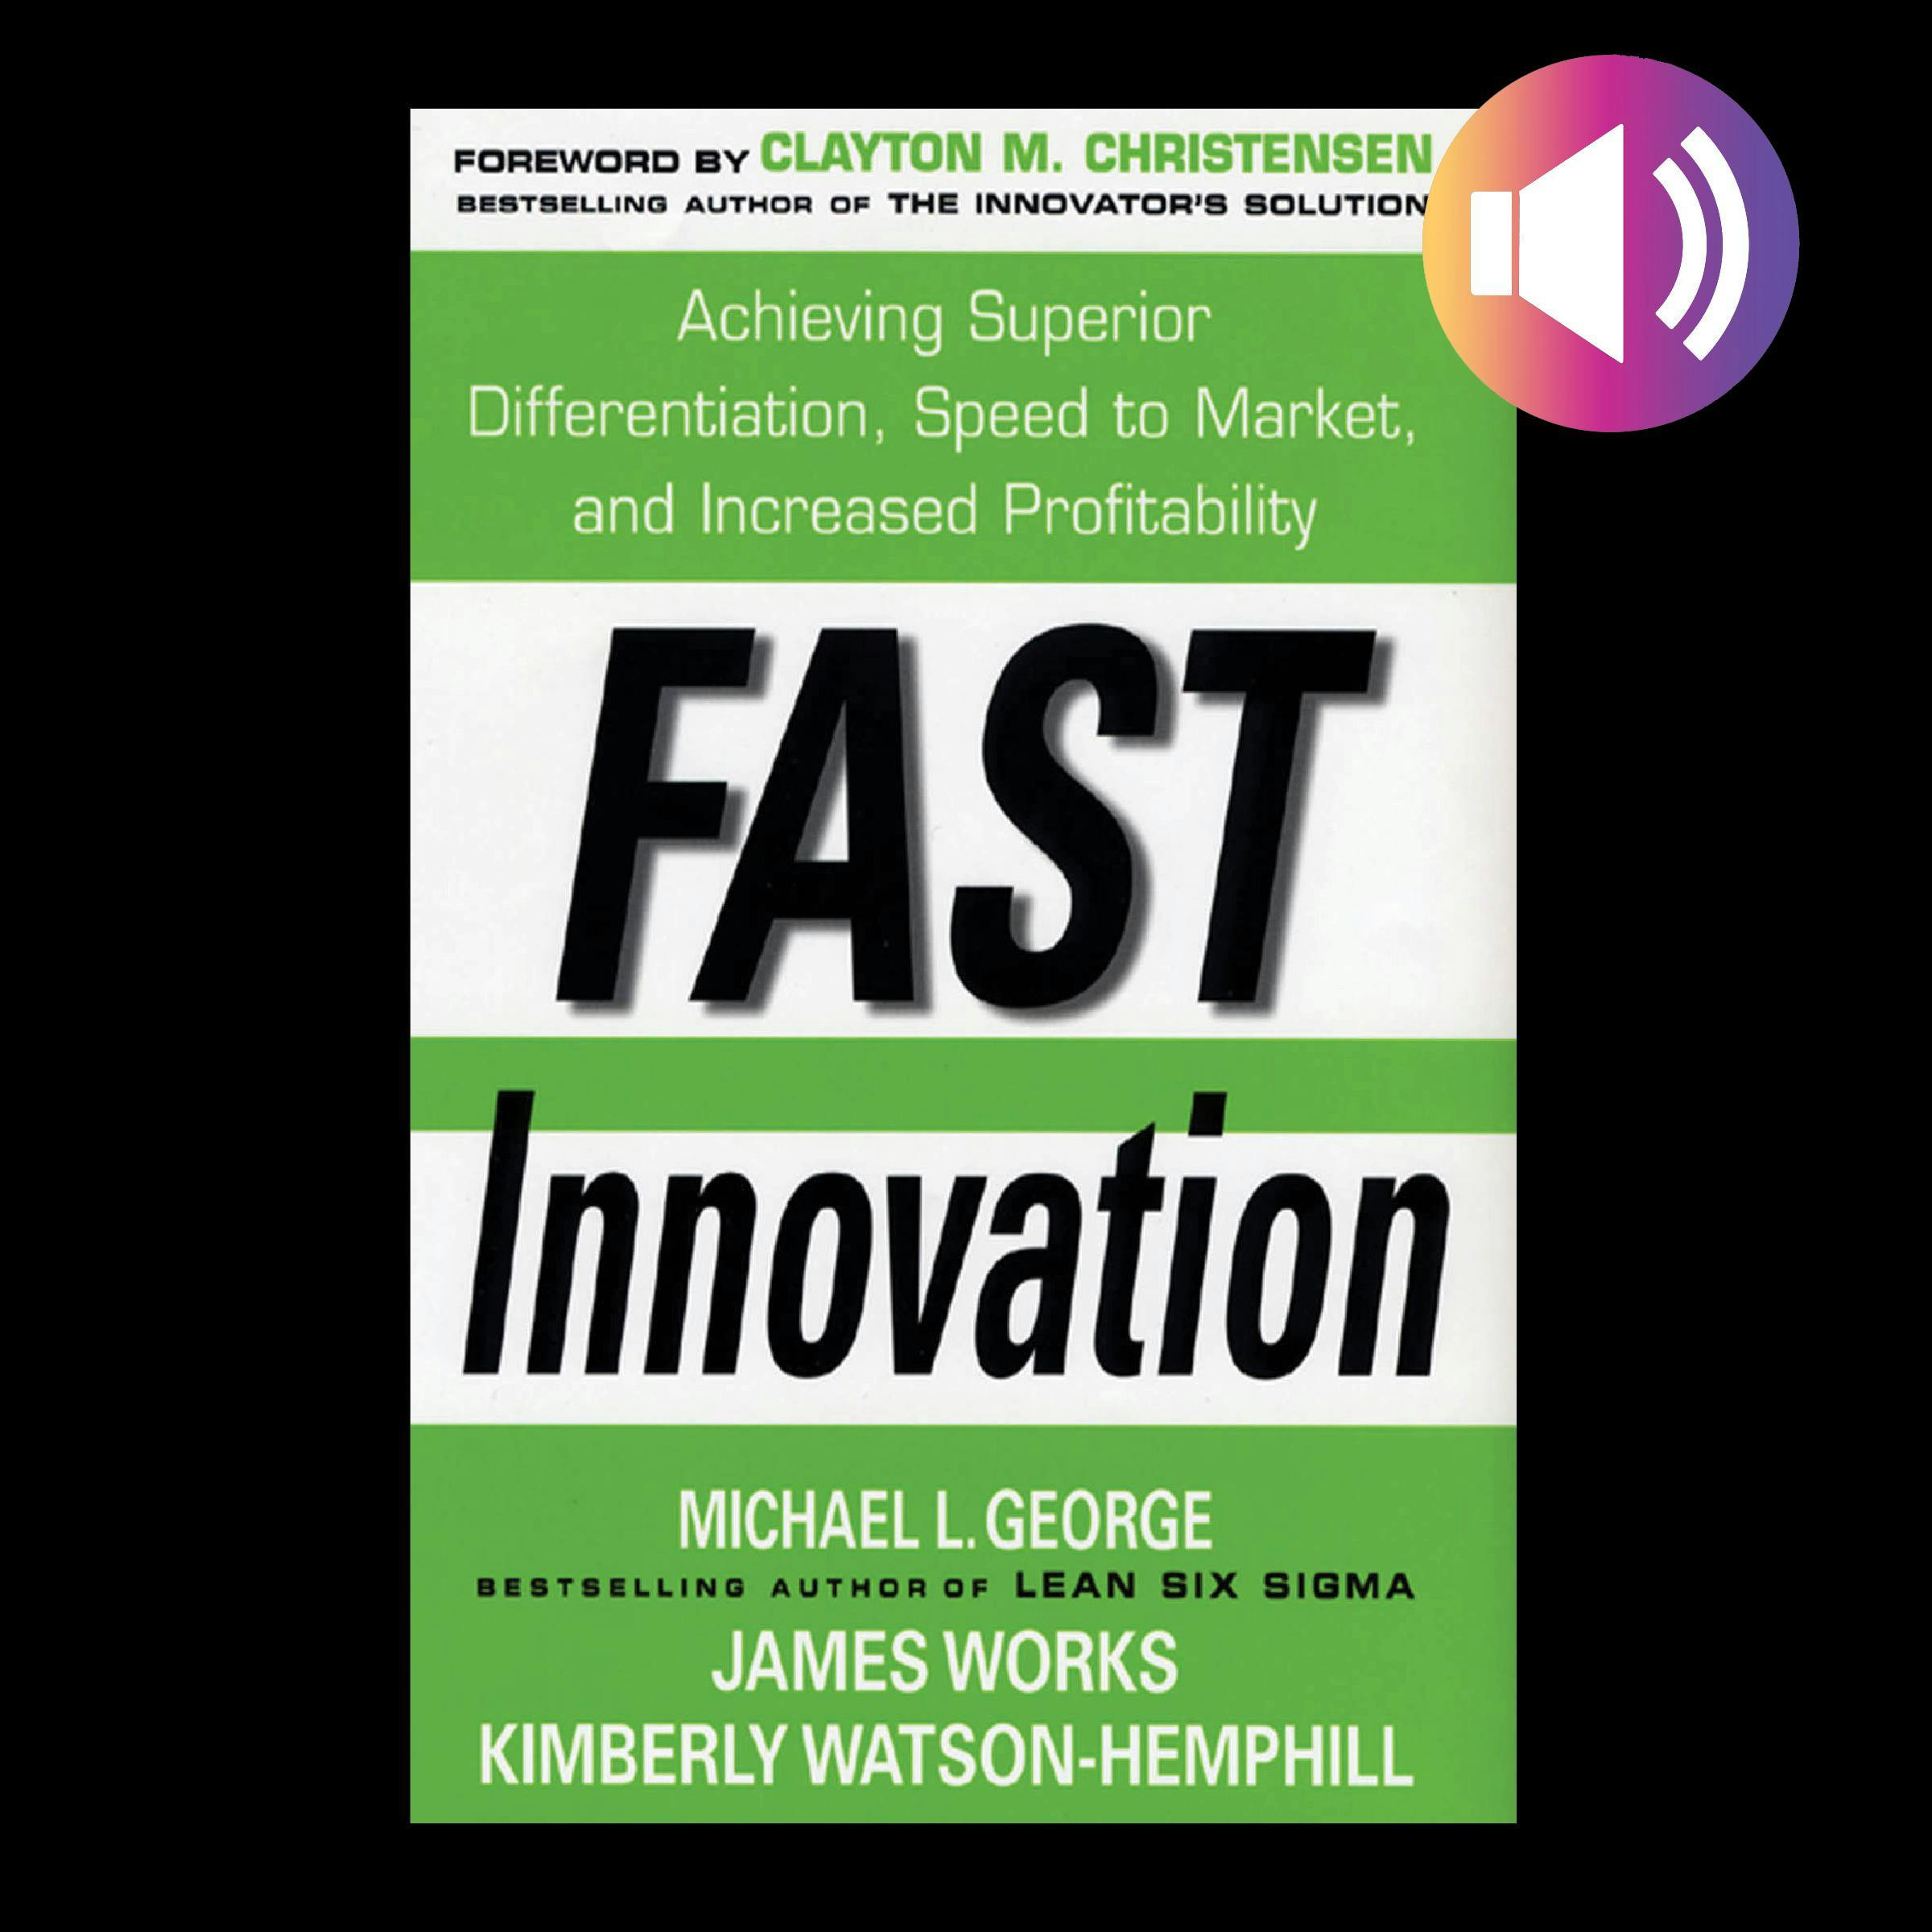 Fast Innovation: Achieving Superior Differentiation, Speed to Market, and Increased Profitability - Kimberly Watson-Hemphill, James Works, Michael L. George, Clayton M. Christensen